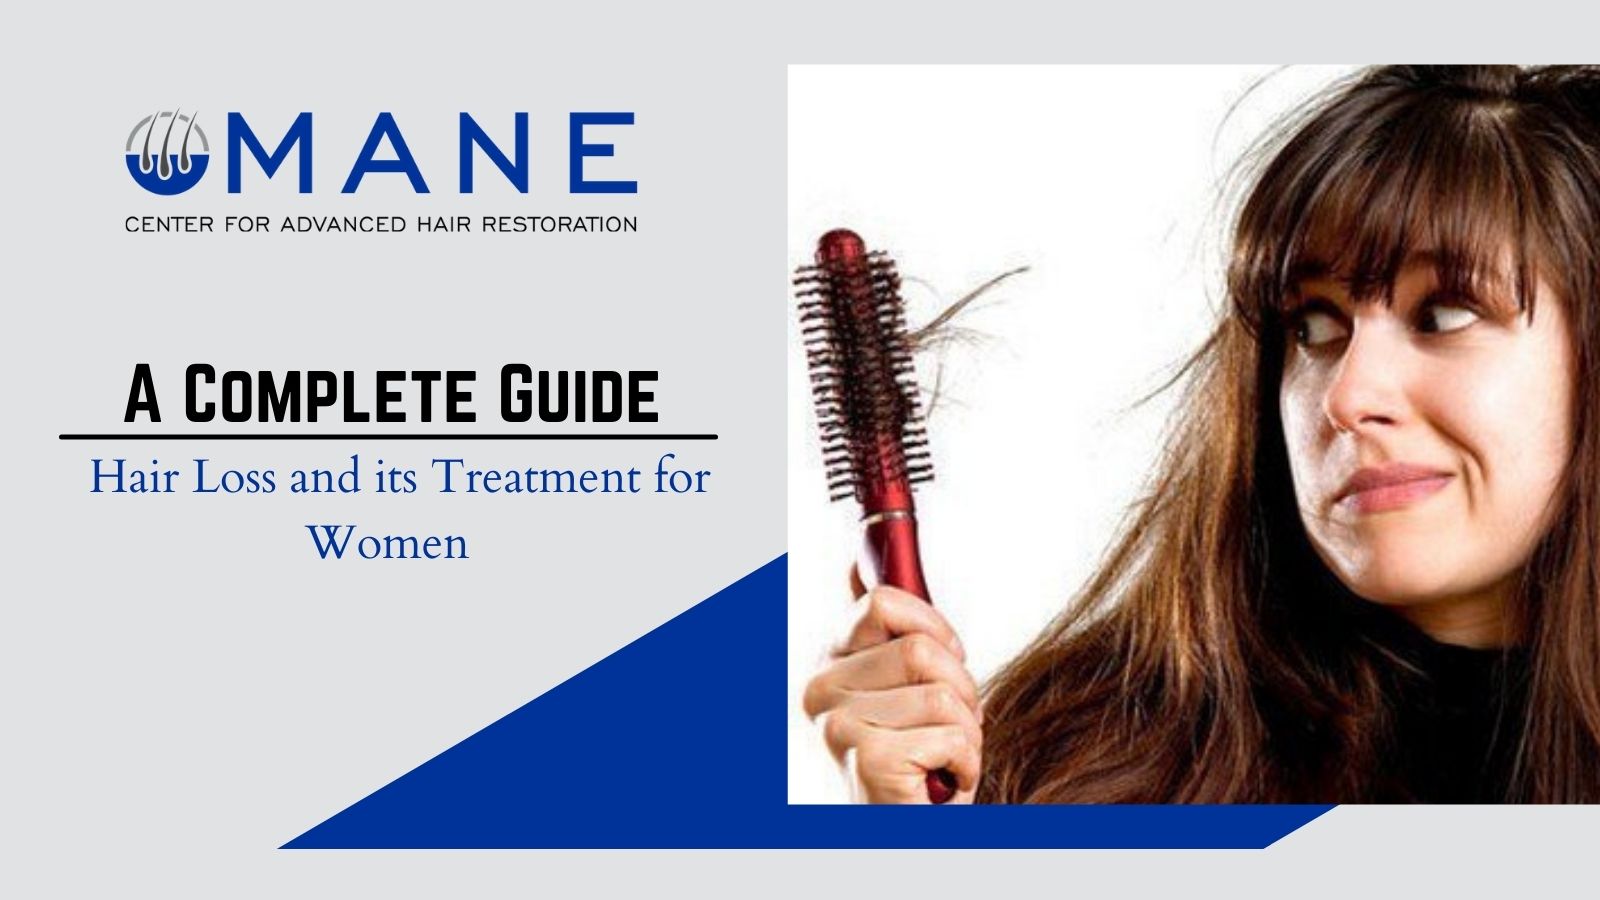 A Complete Guide on Hair Loss and its Treatment for Women